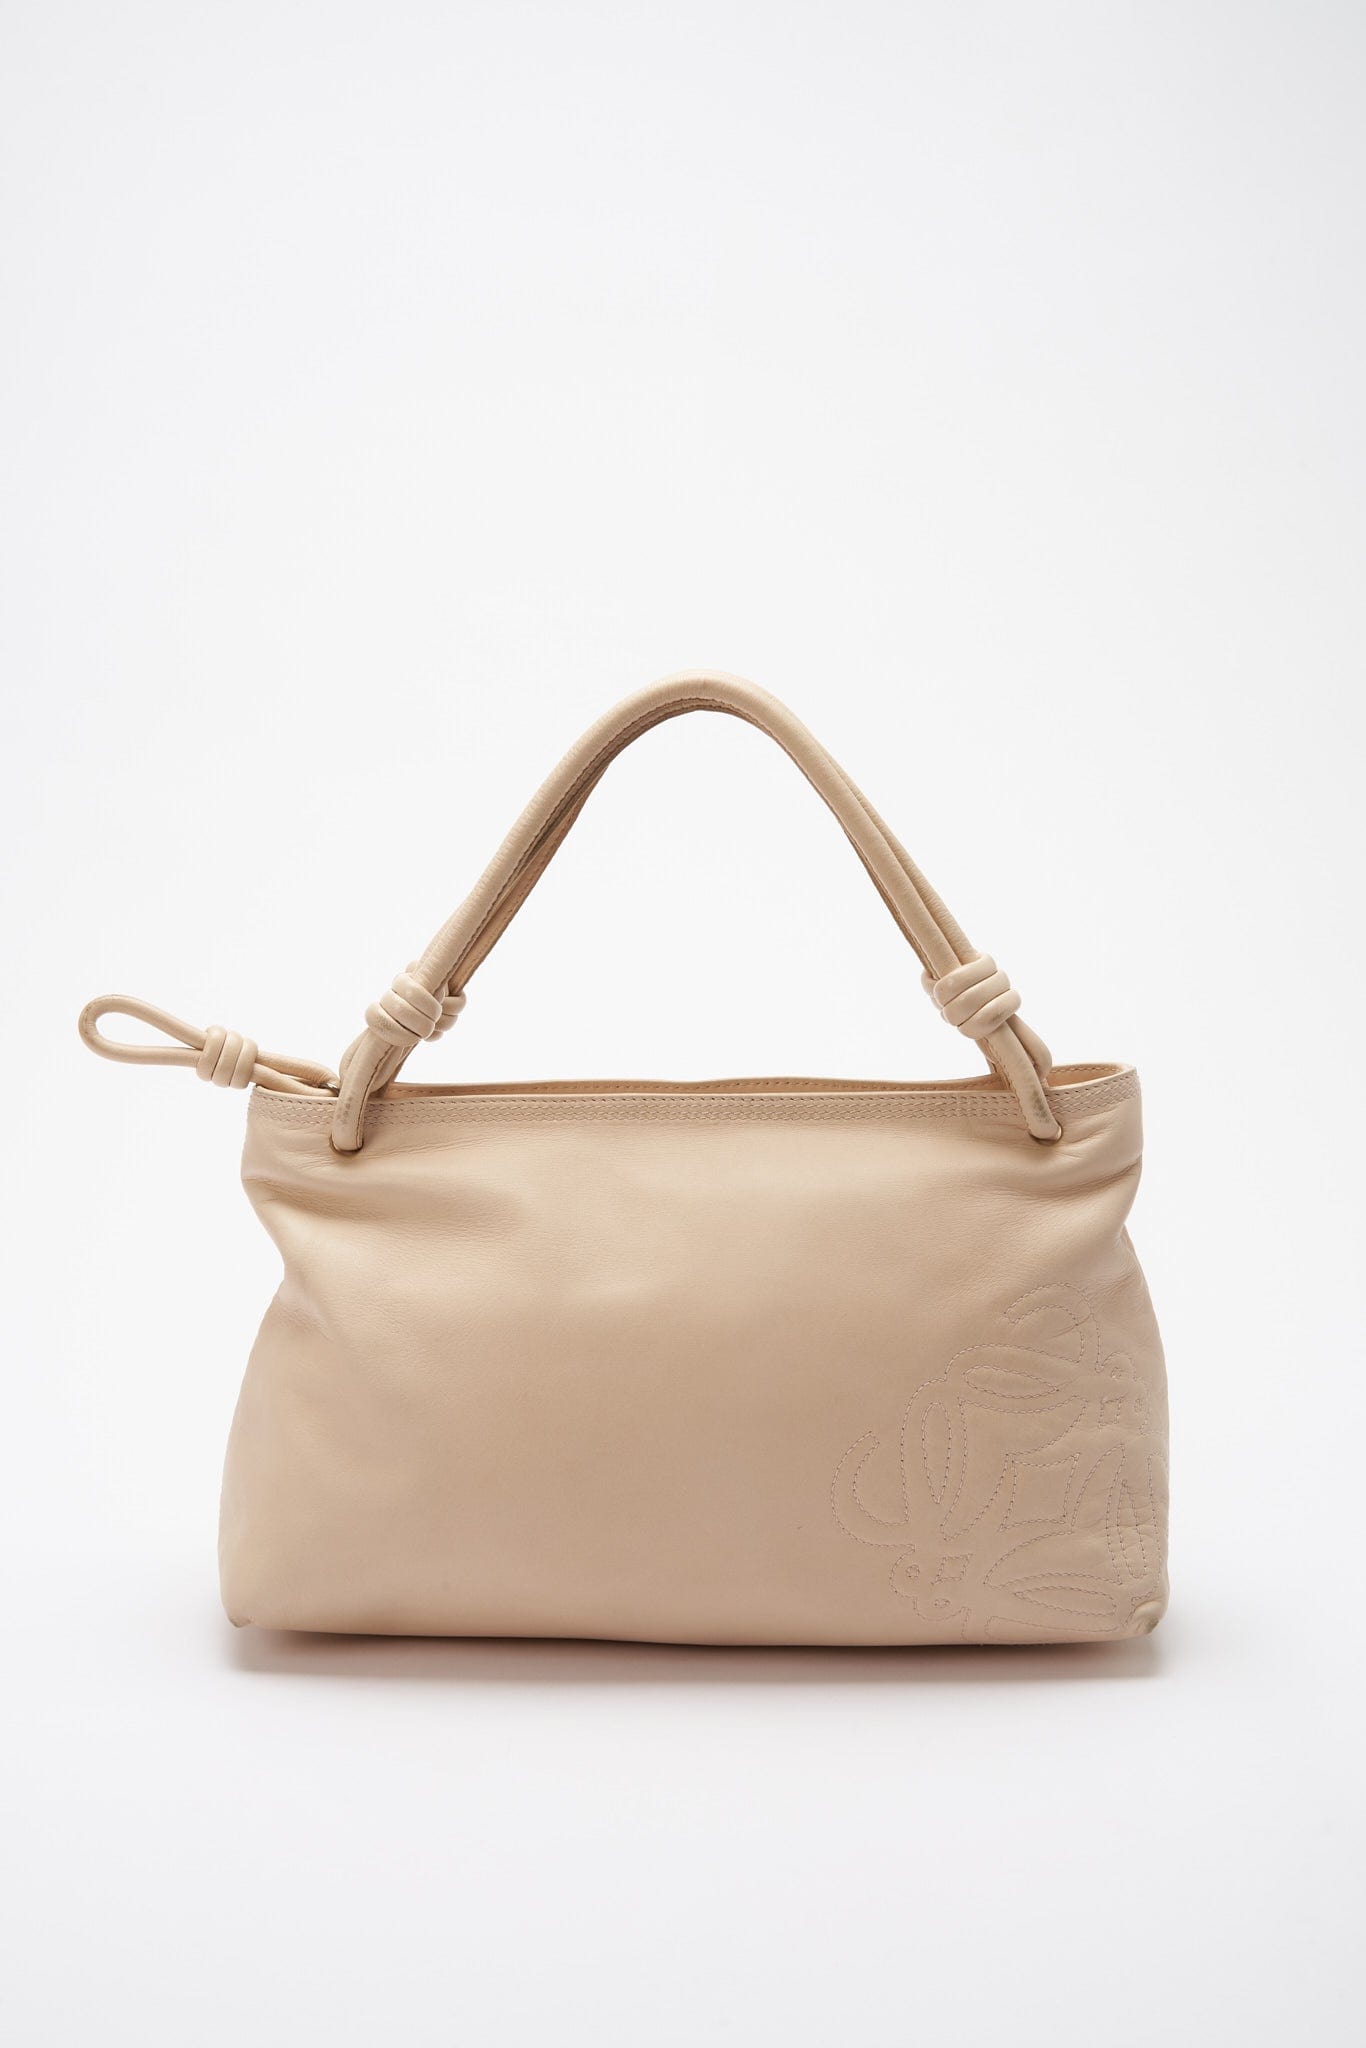 Loewe Pre-Owned Anagram Knot Leather Bag - Farfetch